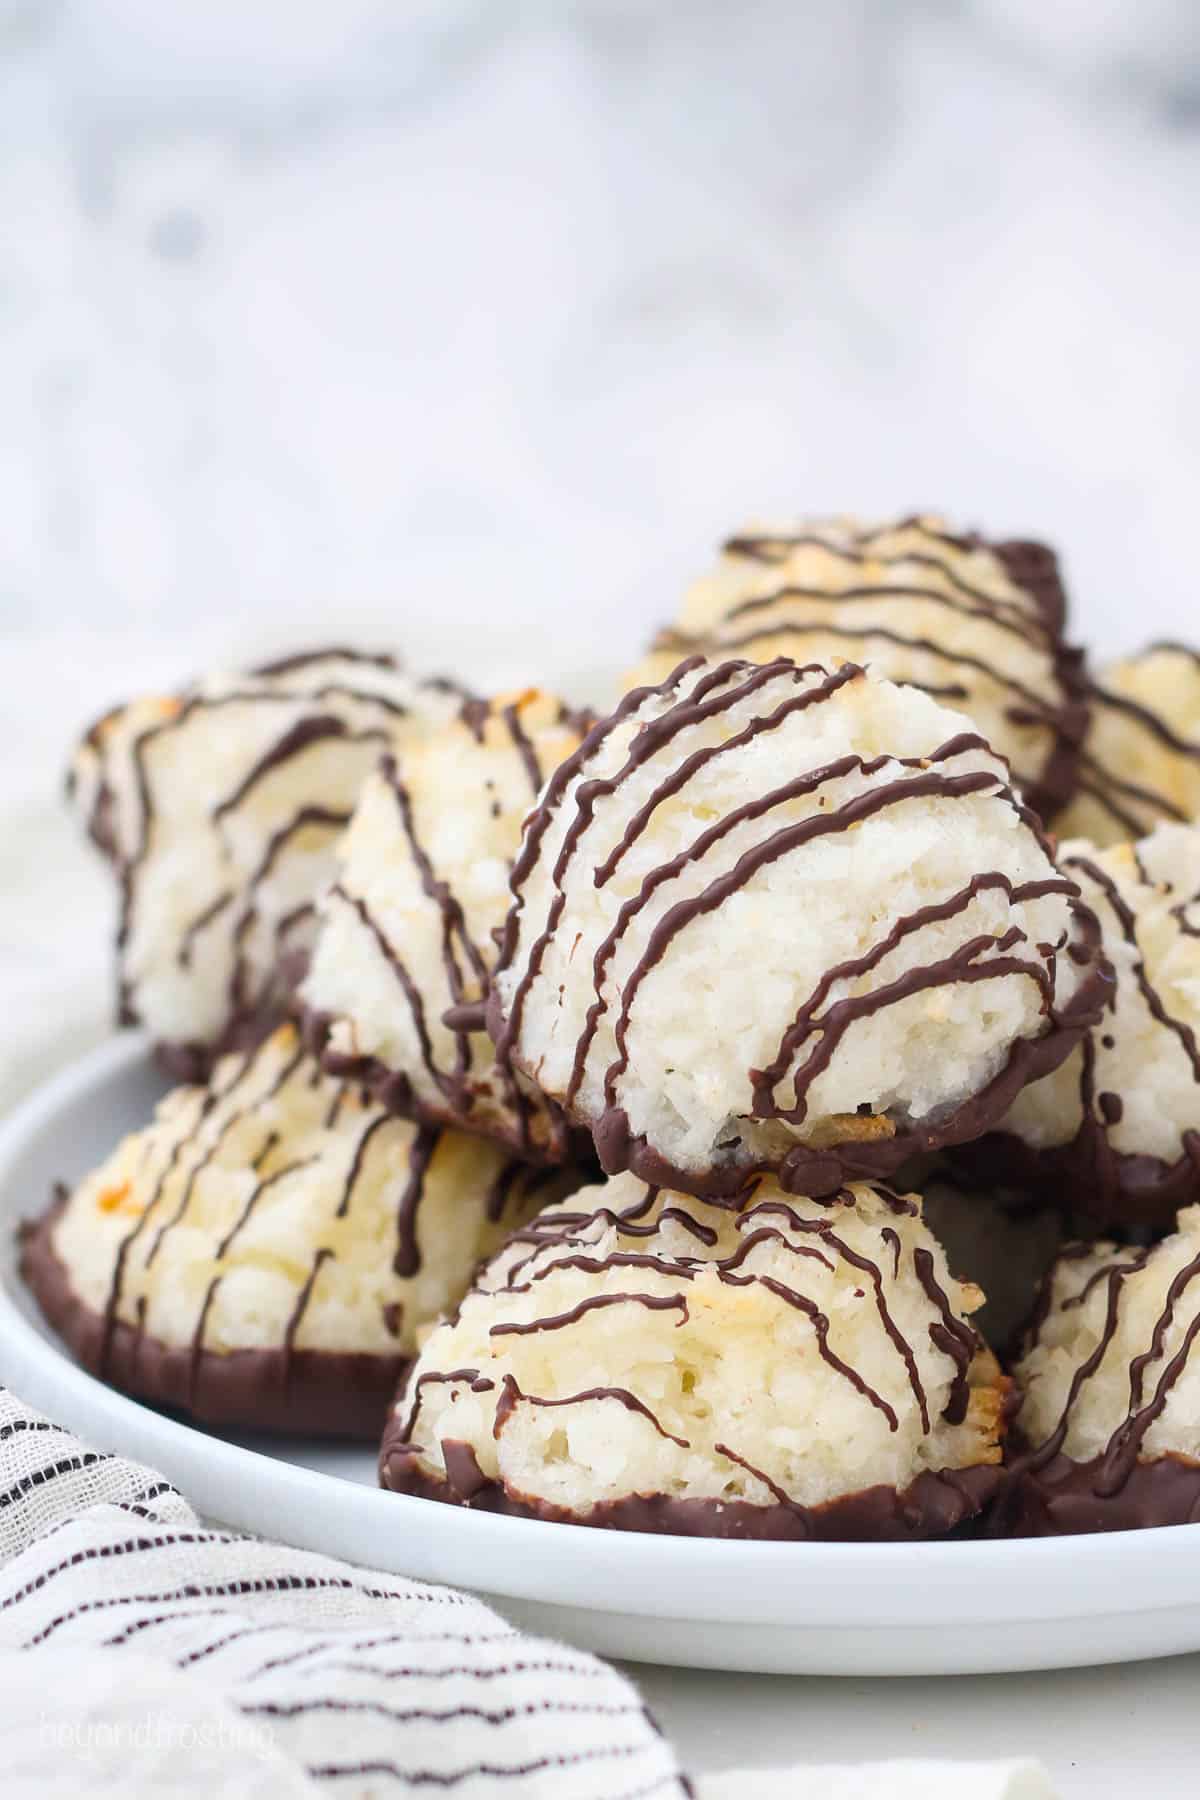 Coconut cookies with a chocolate drizzle piled onto a white plate